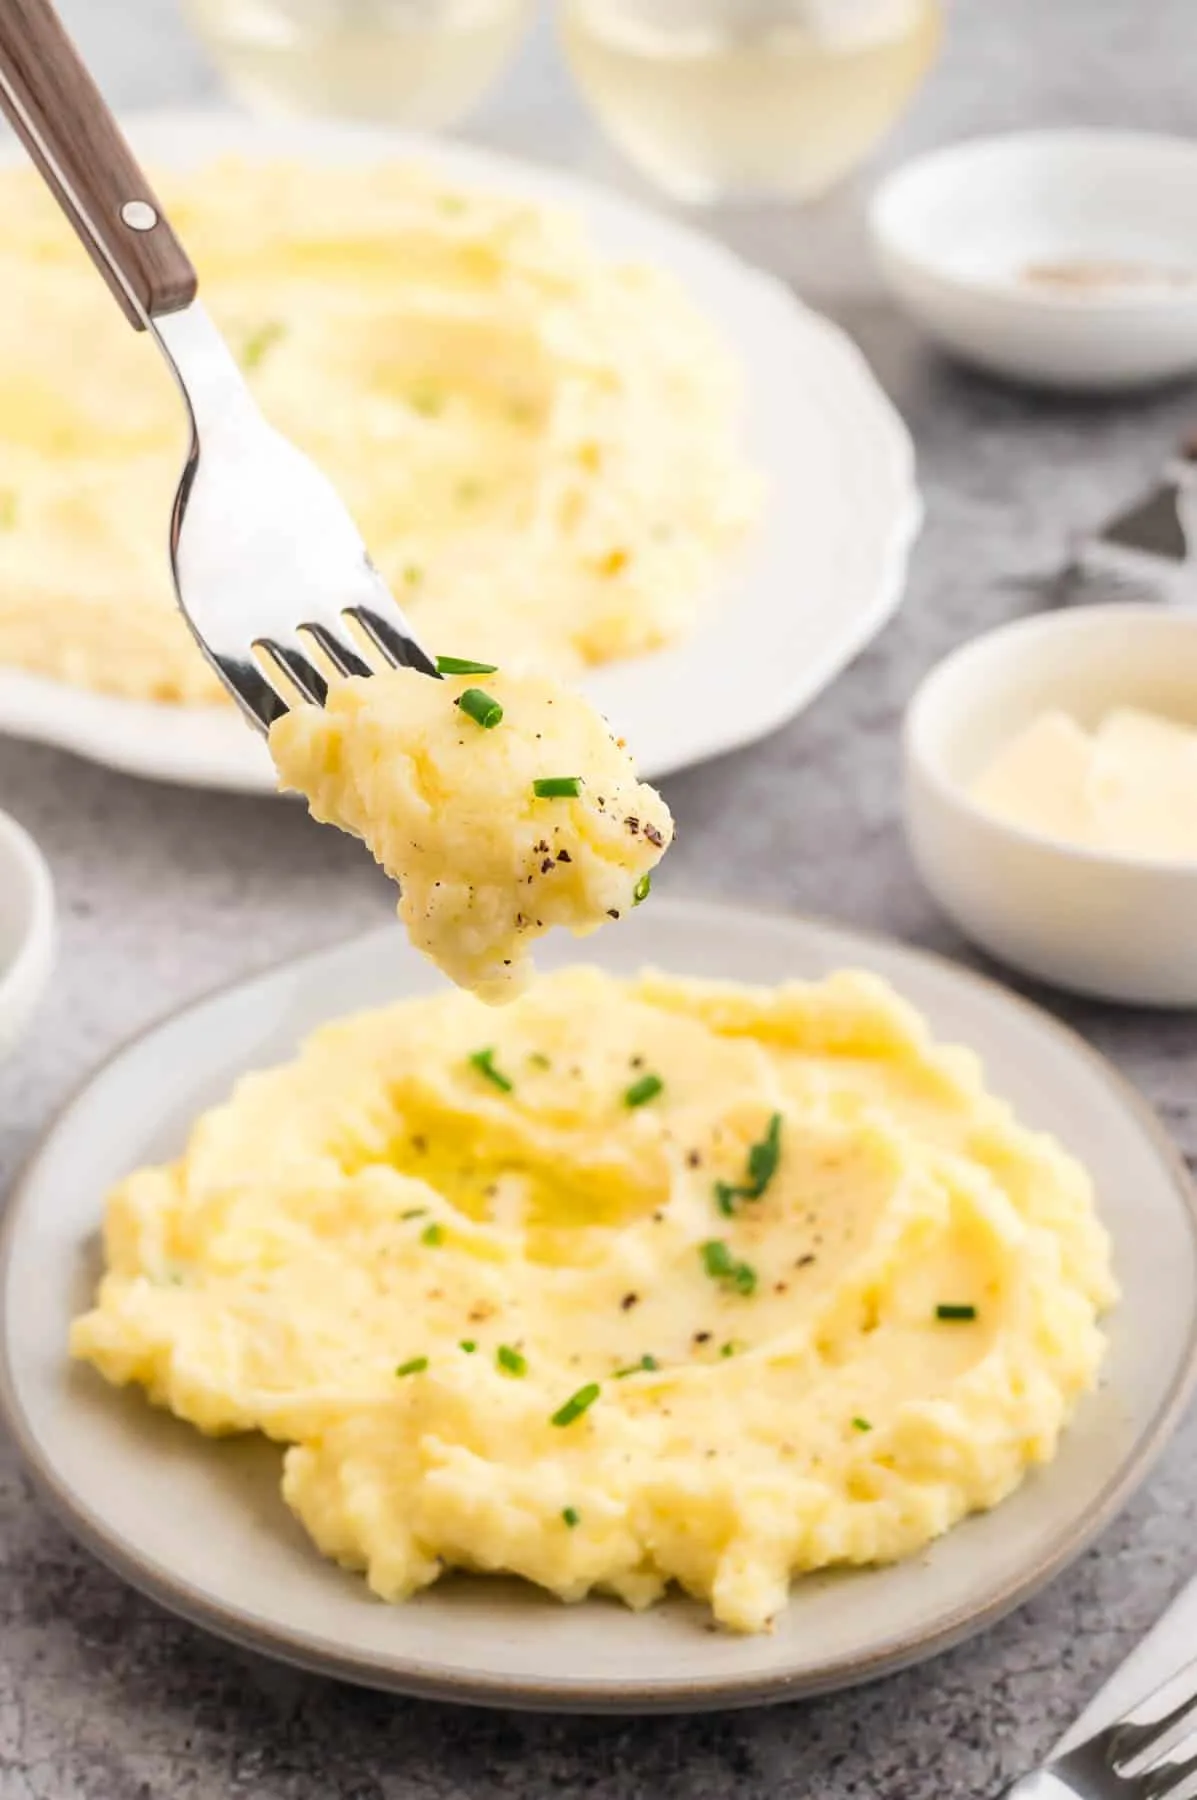 Sour Cream and Chive Mashed Potatoes are rich and creamy mashed potatoes loaded with sour cream, butter, milk and chopped chives.